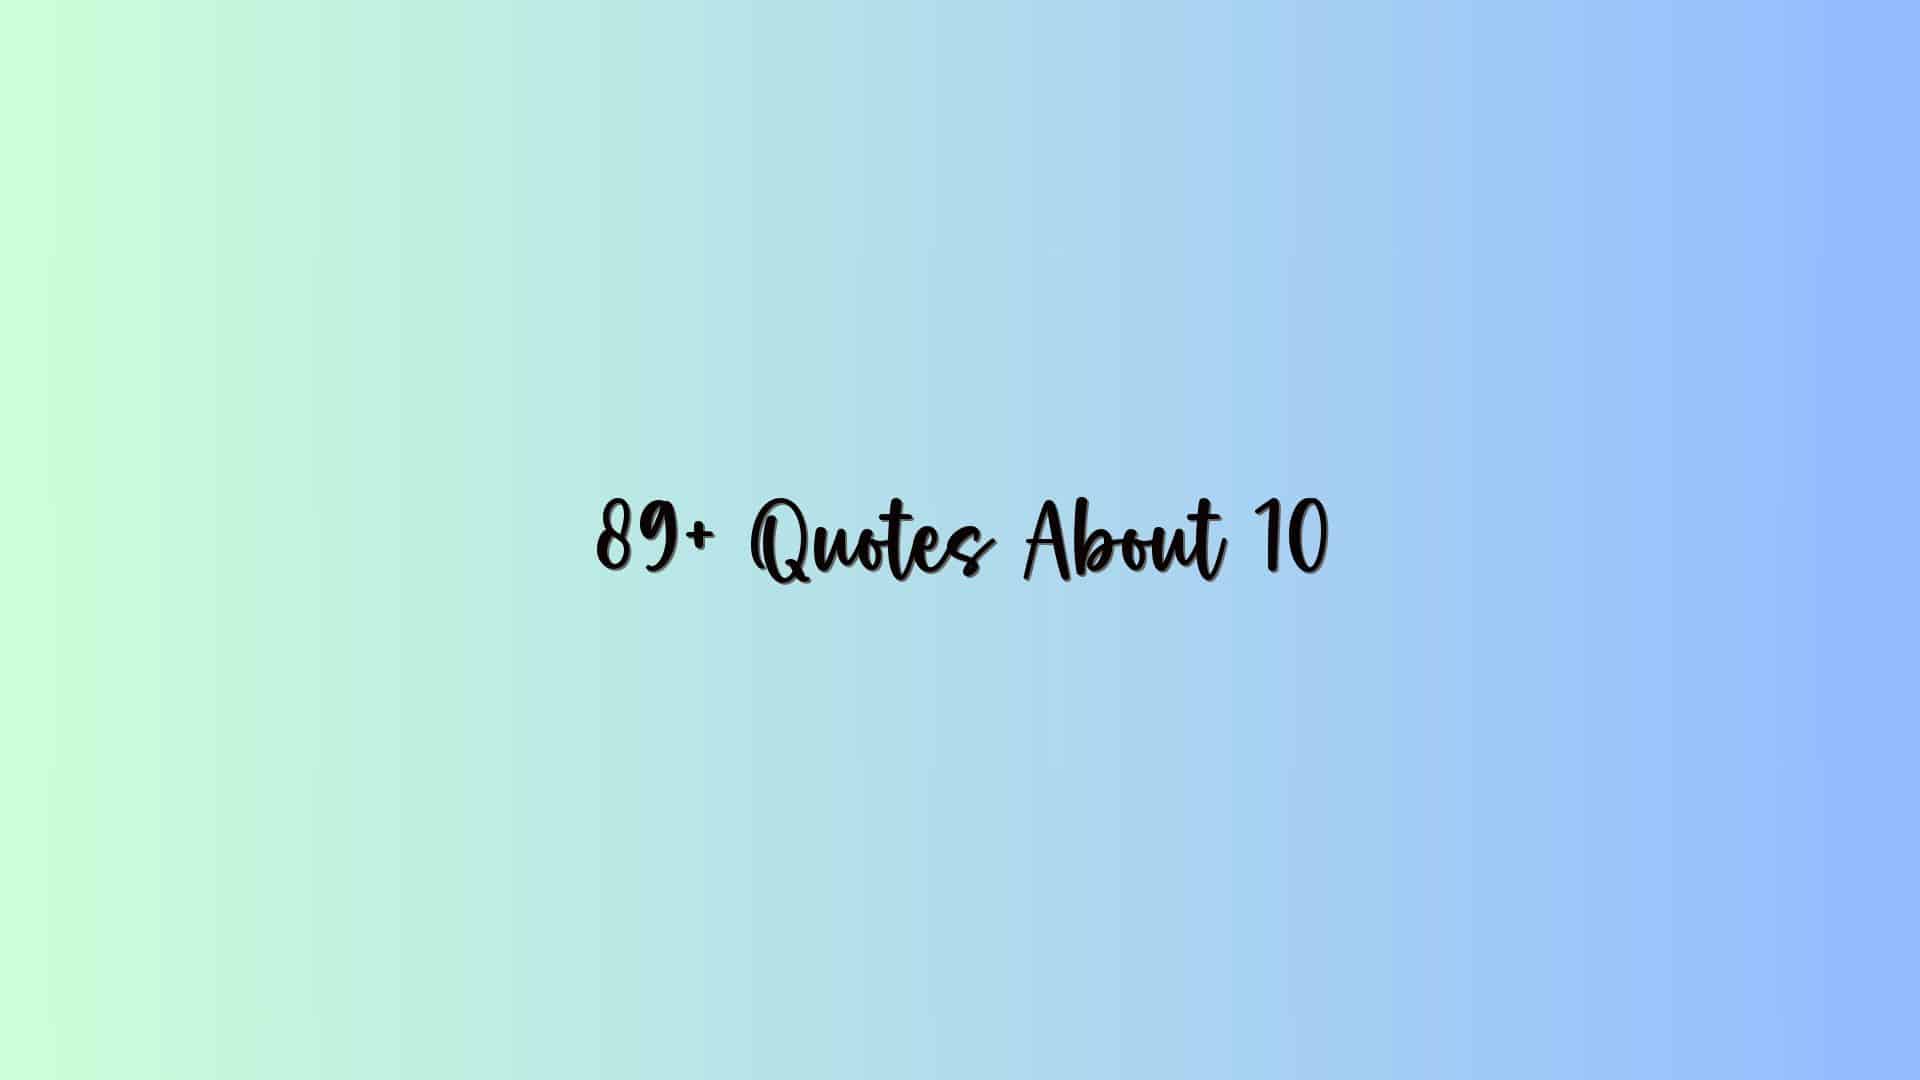 89+ Quotes About 10